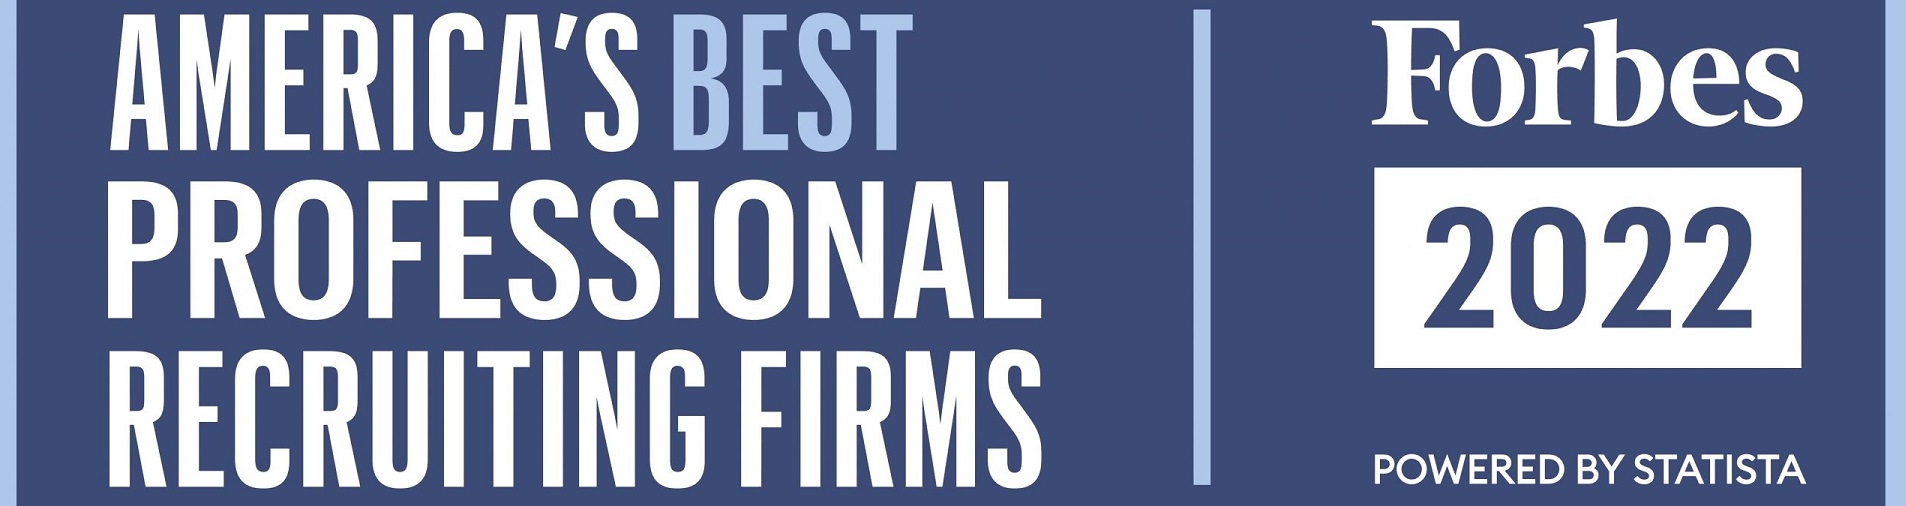 Forbes Best Professional Recruiting Firm - Express Employment Professionals